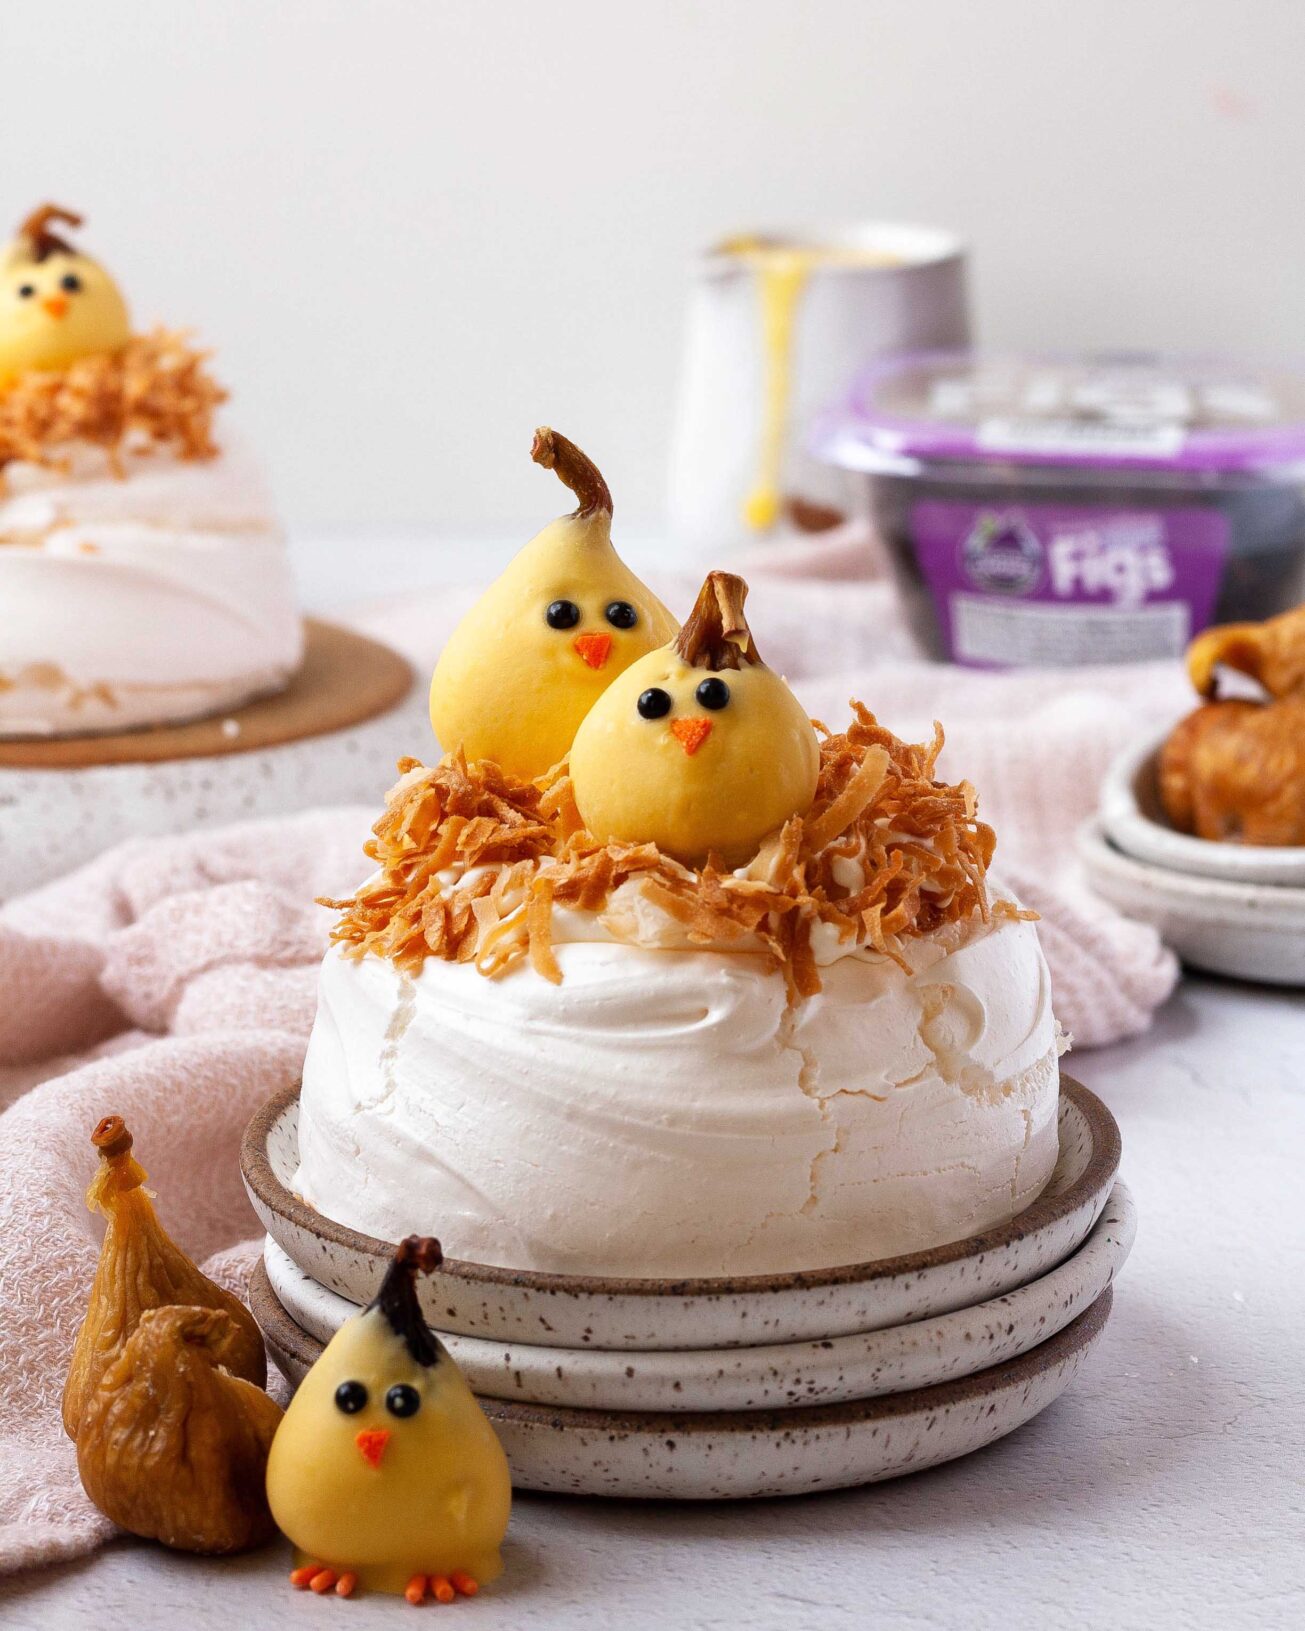 Valley Fig Chicks perched inside a pavlova nest with toasted coconut—light Easter desserts for your festive table.